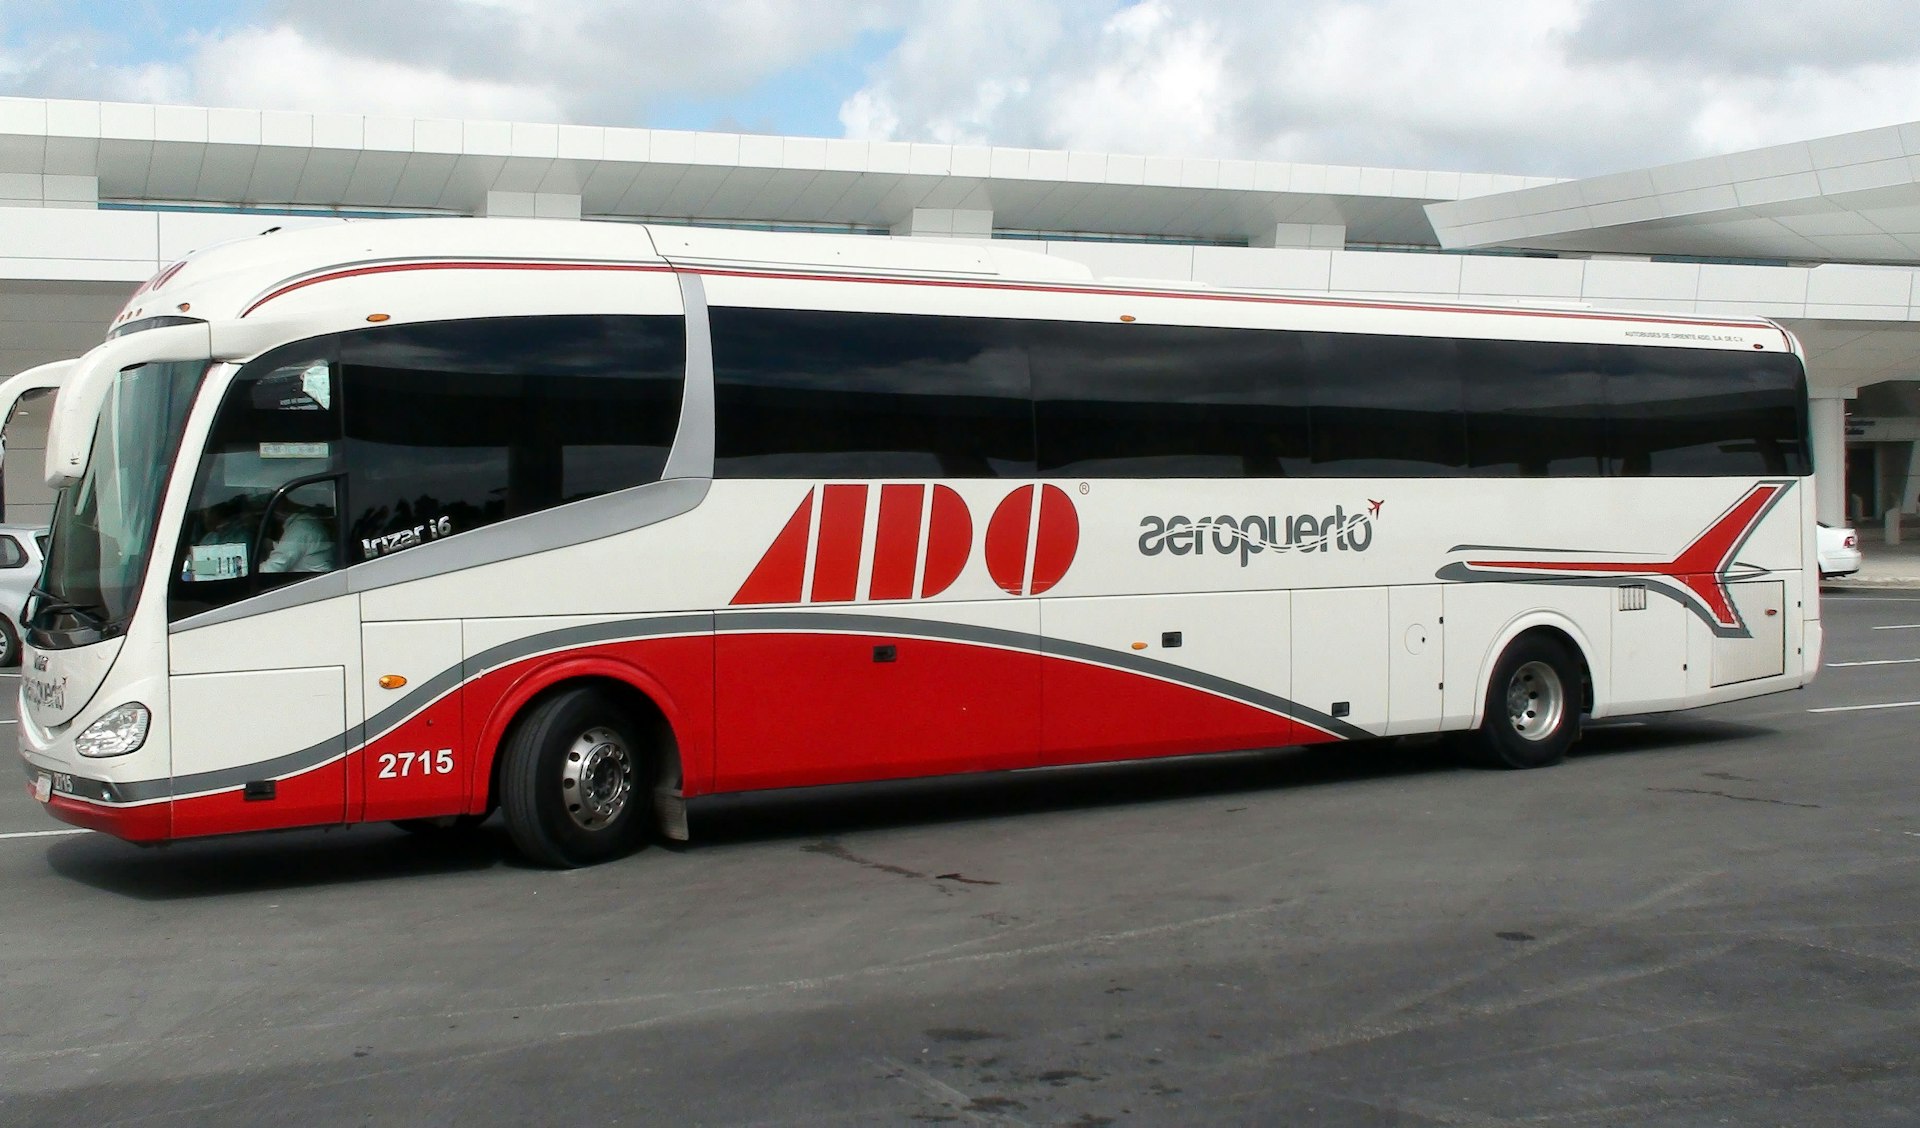 ADO Airport Bus parked at Cancun Airport.